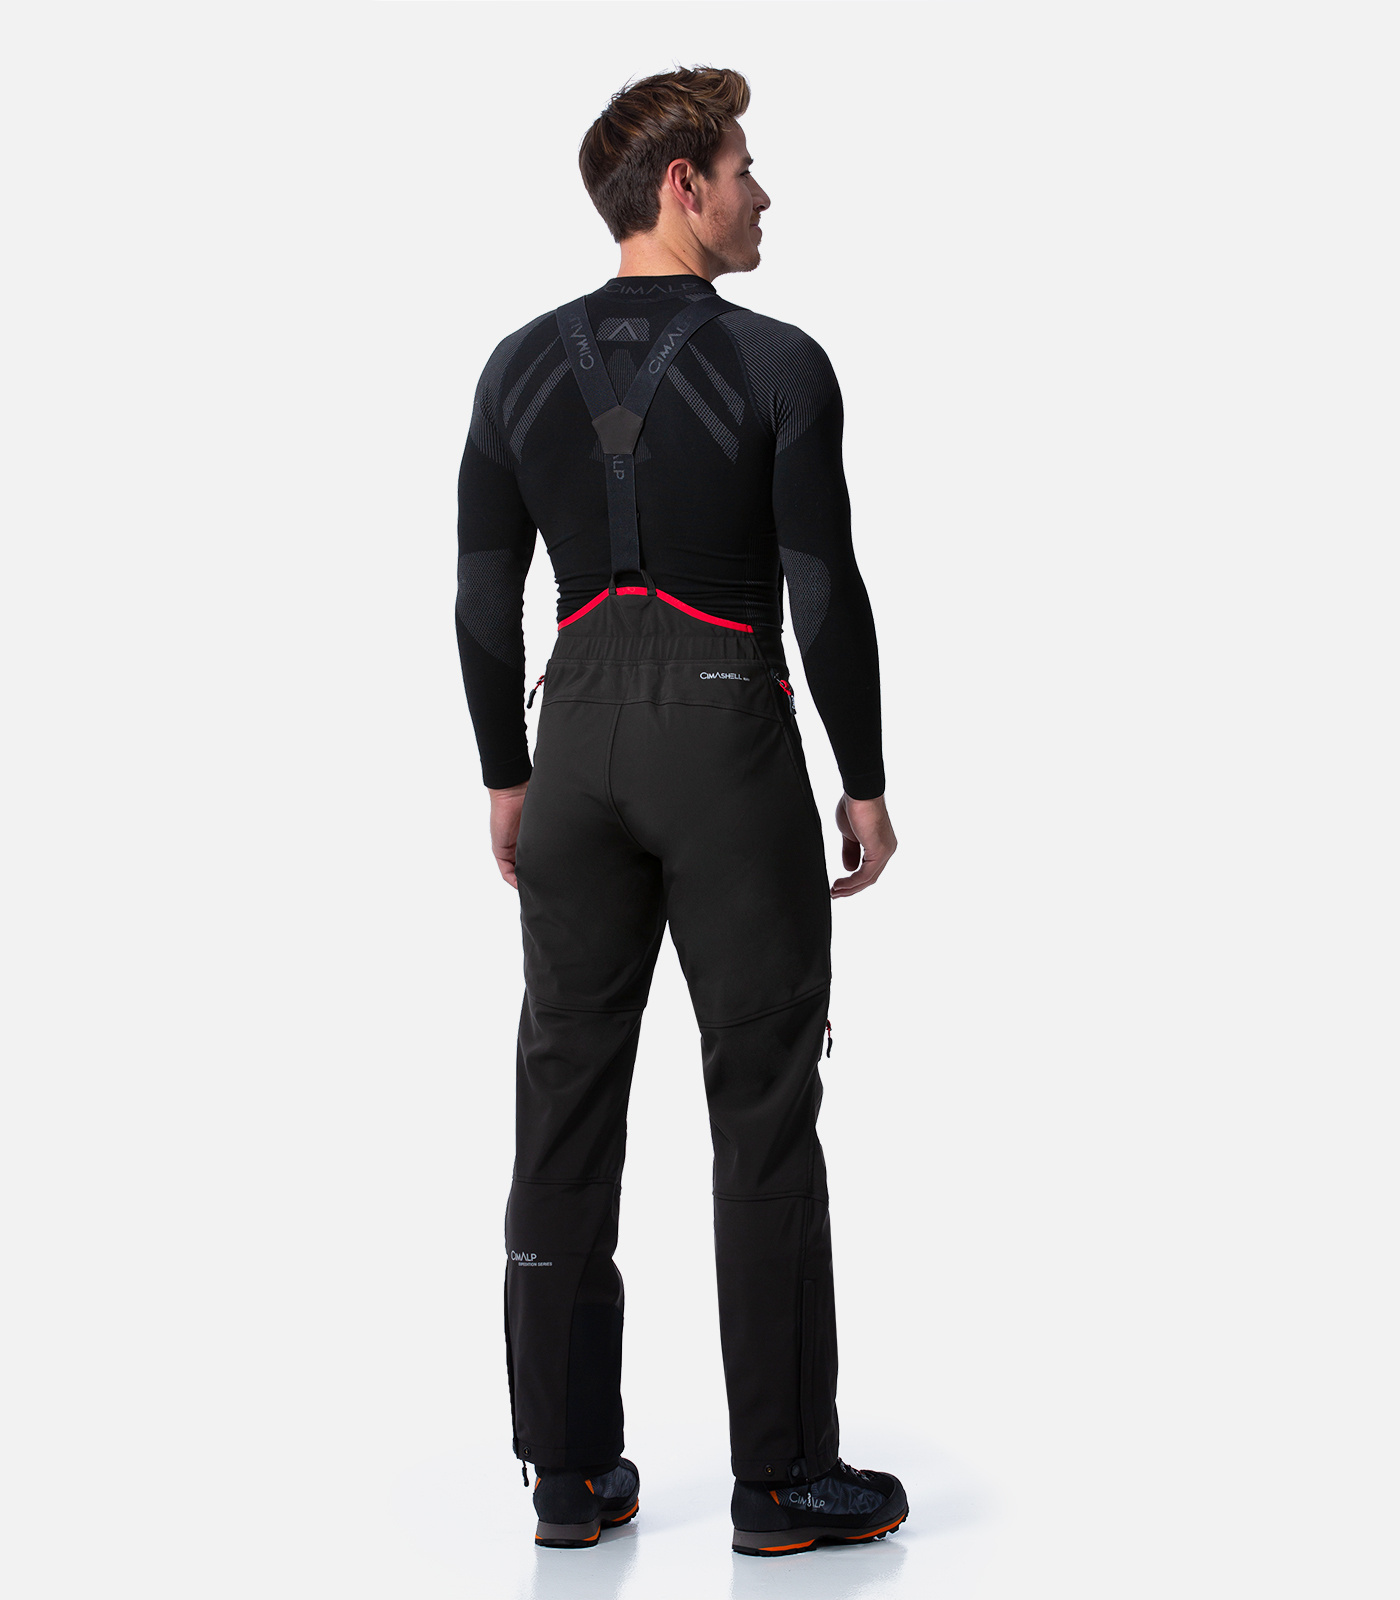 Softshell trousers with side openings